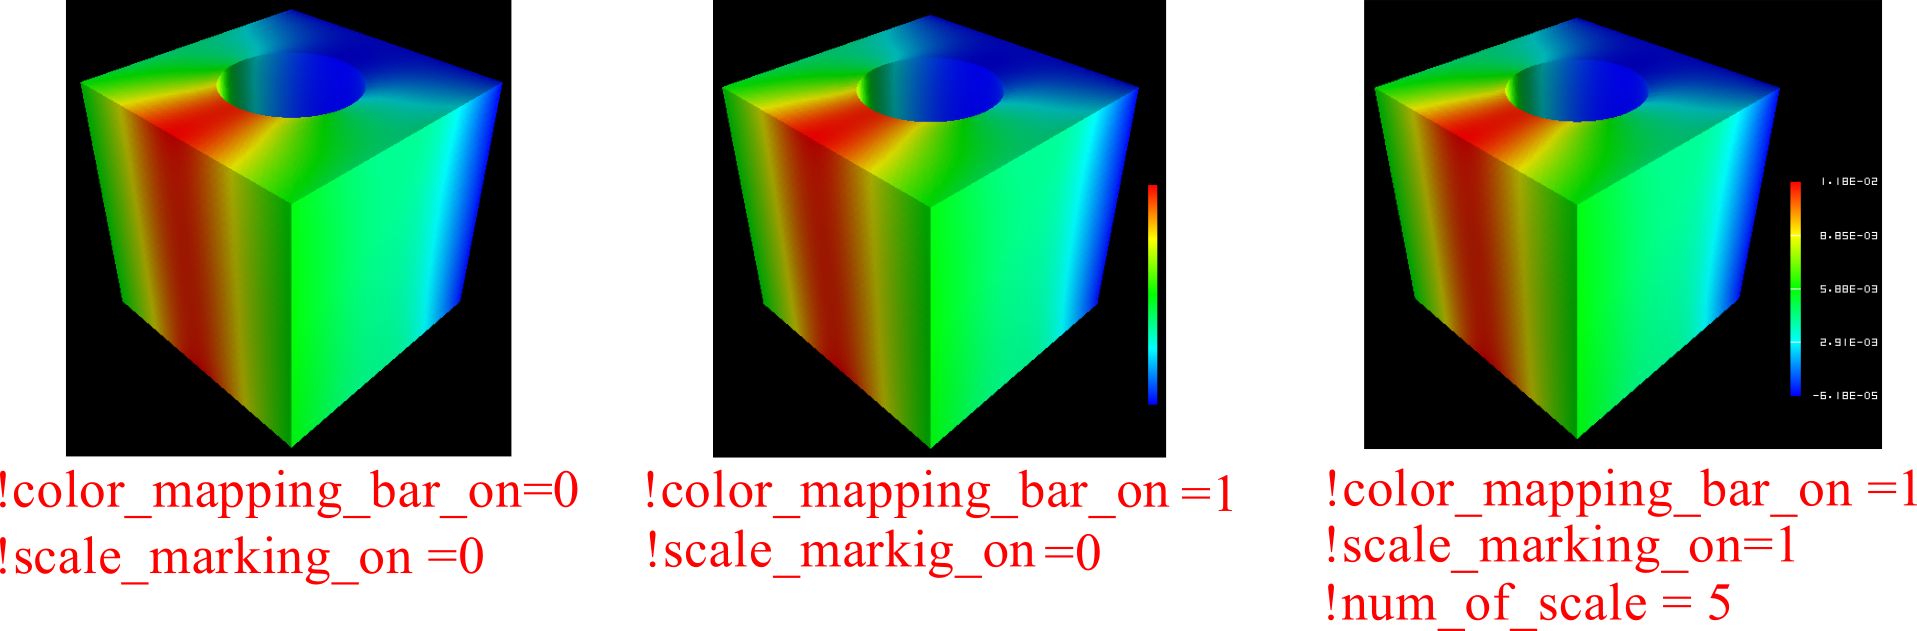 Example of Color Mapping Bar Display